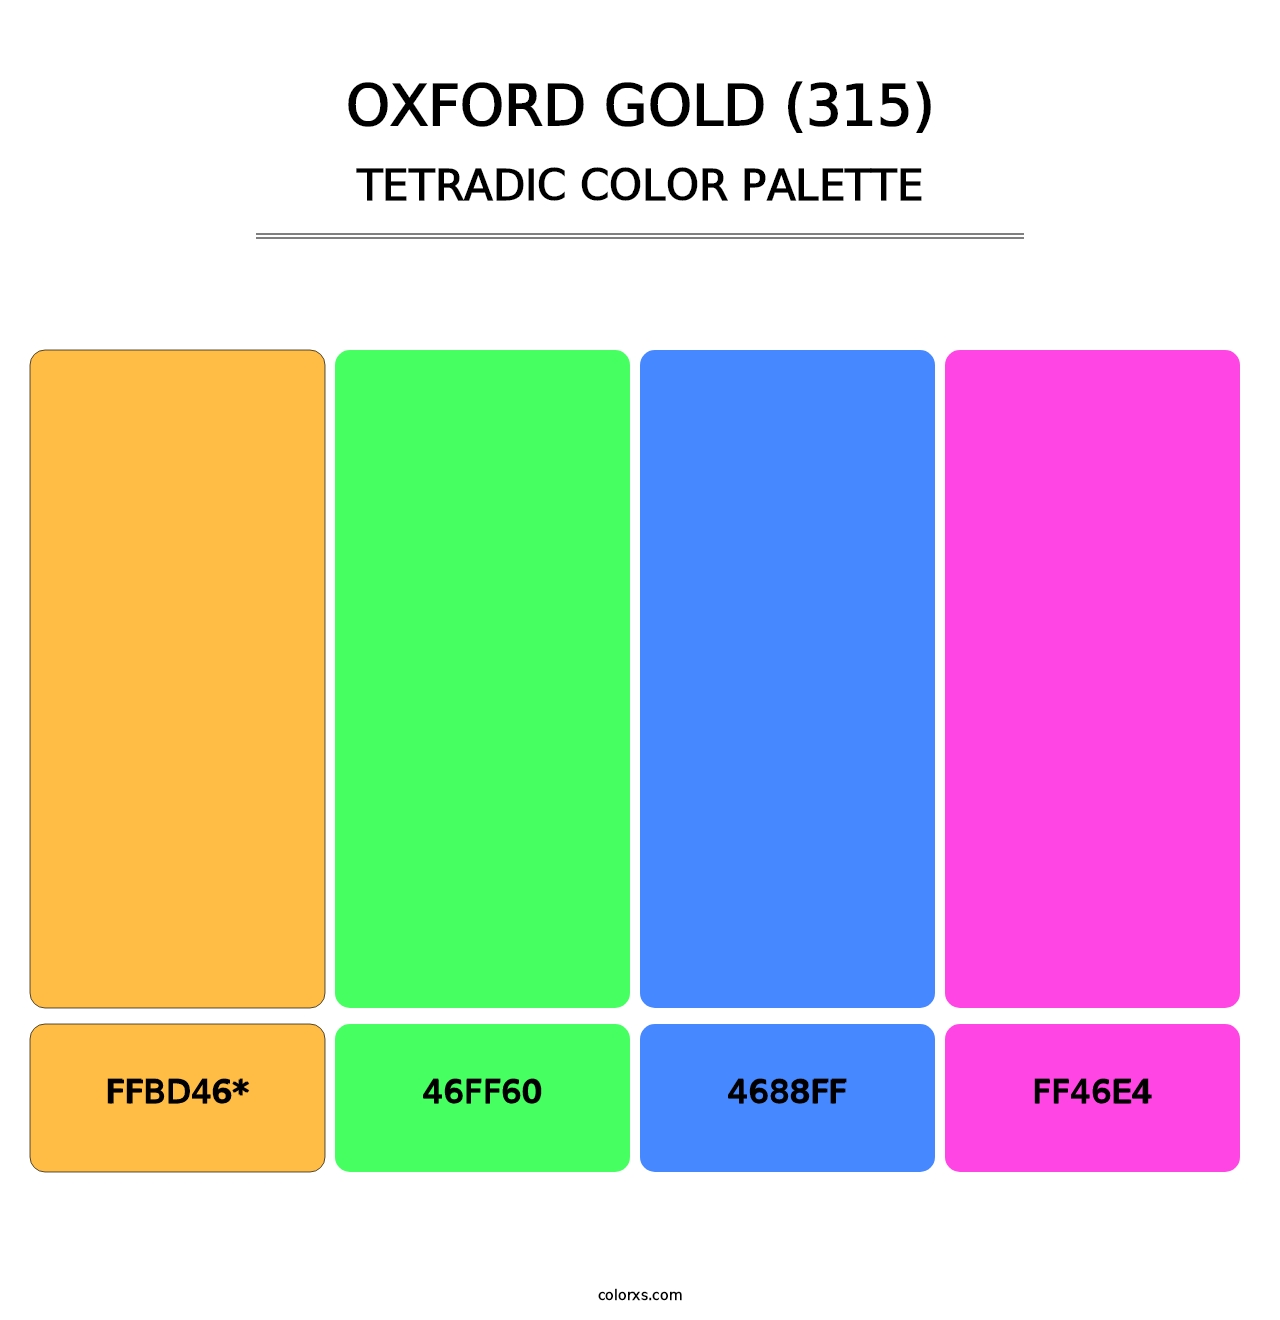 Oxford Gold (315) - Tetradic Color Palette